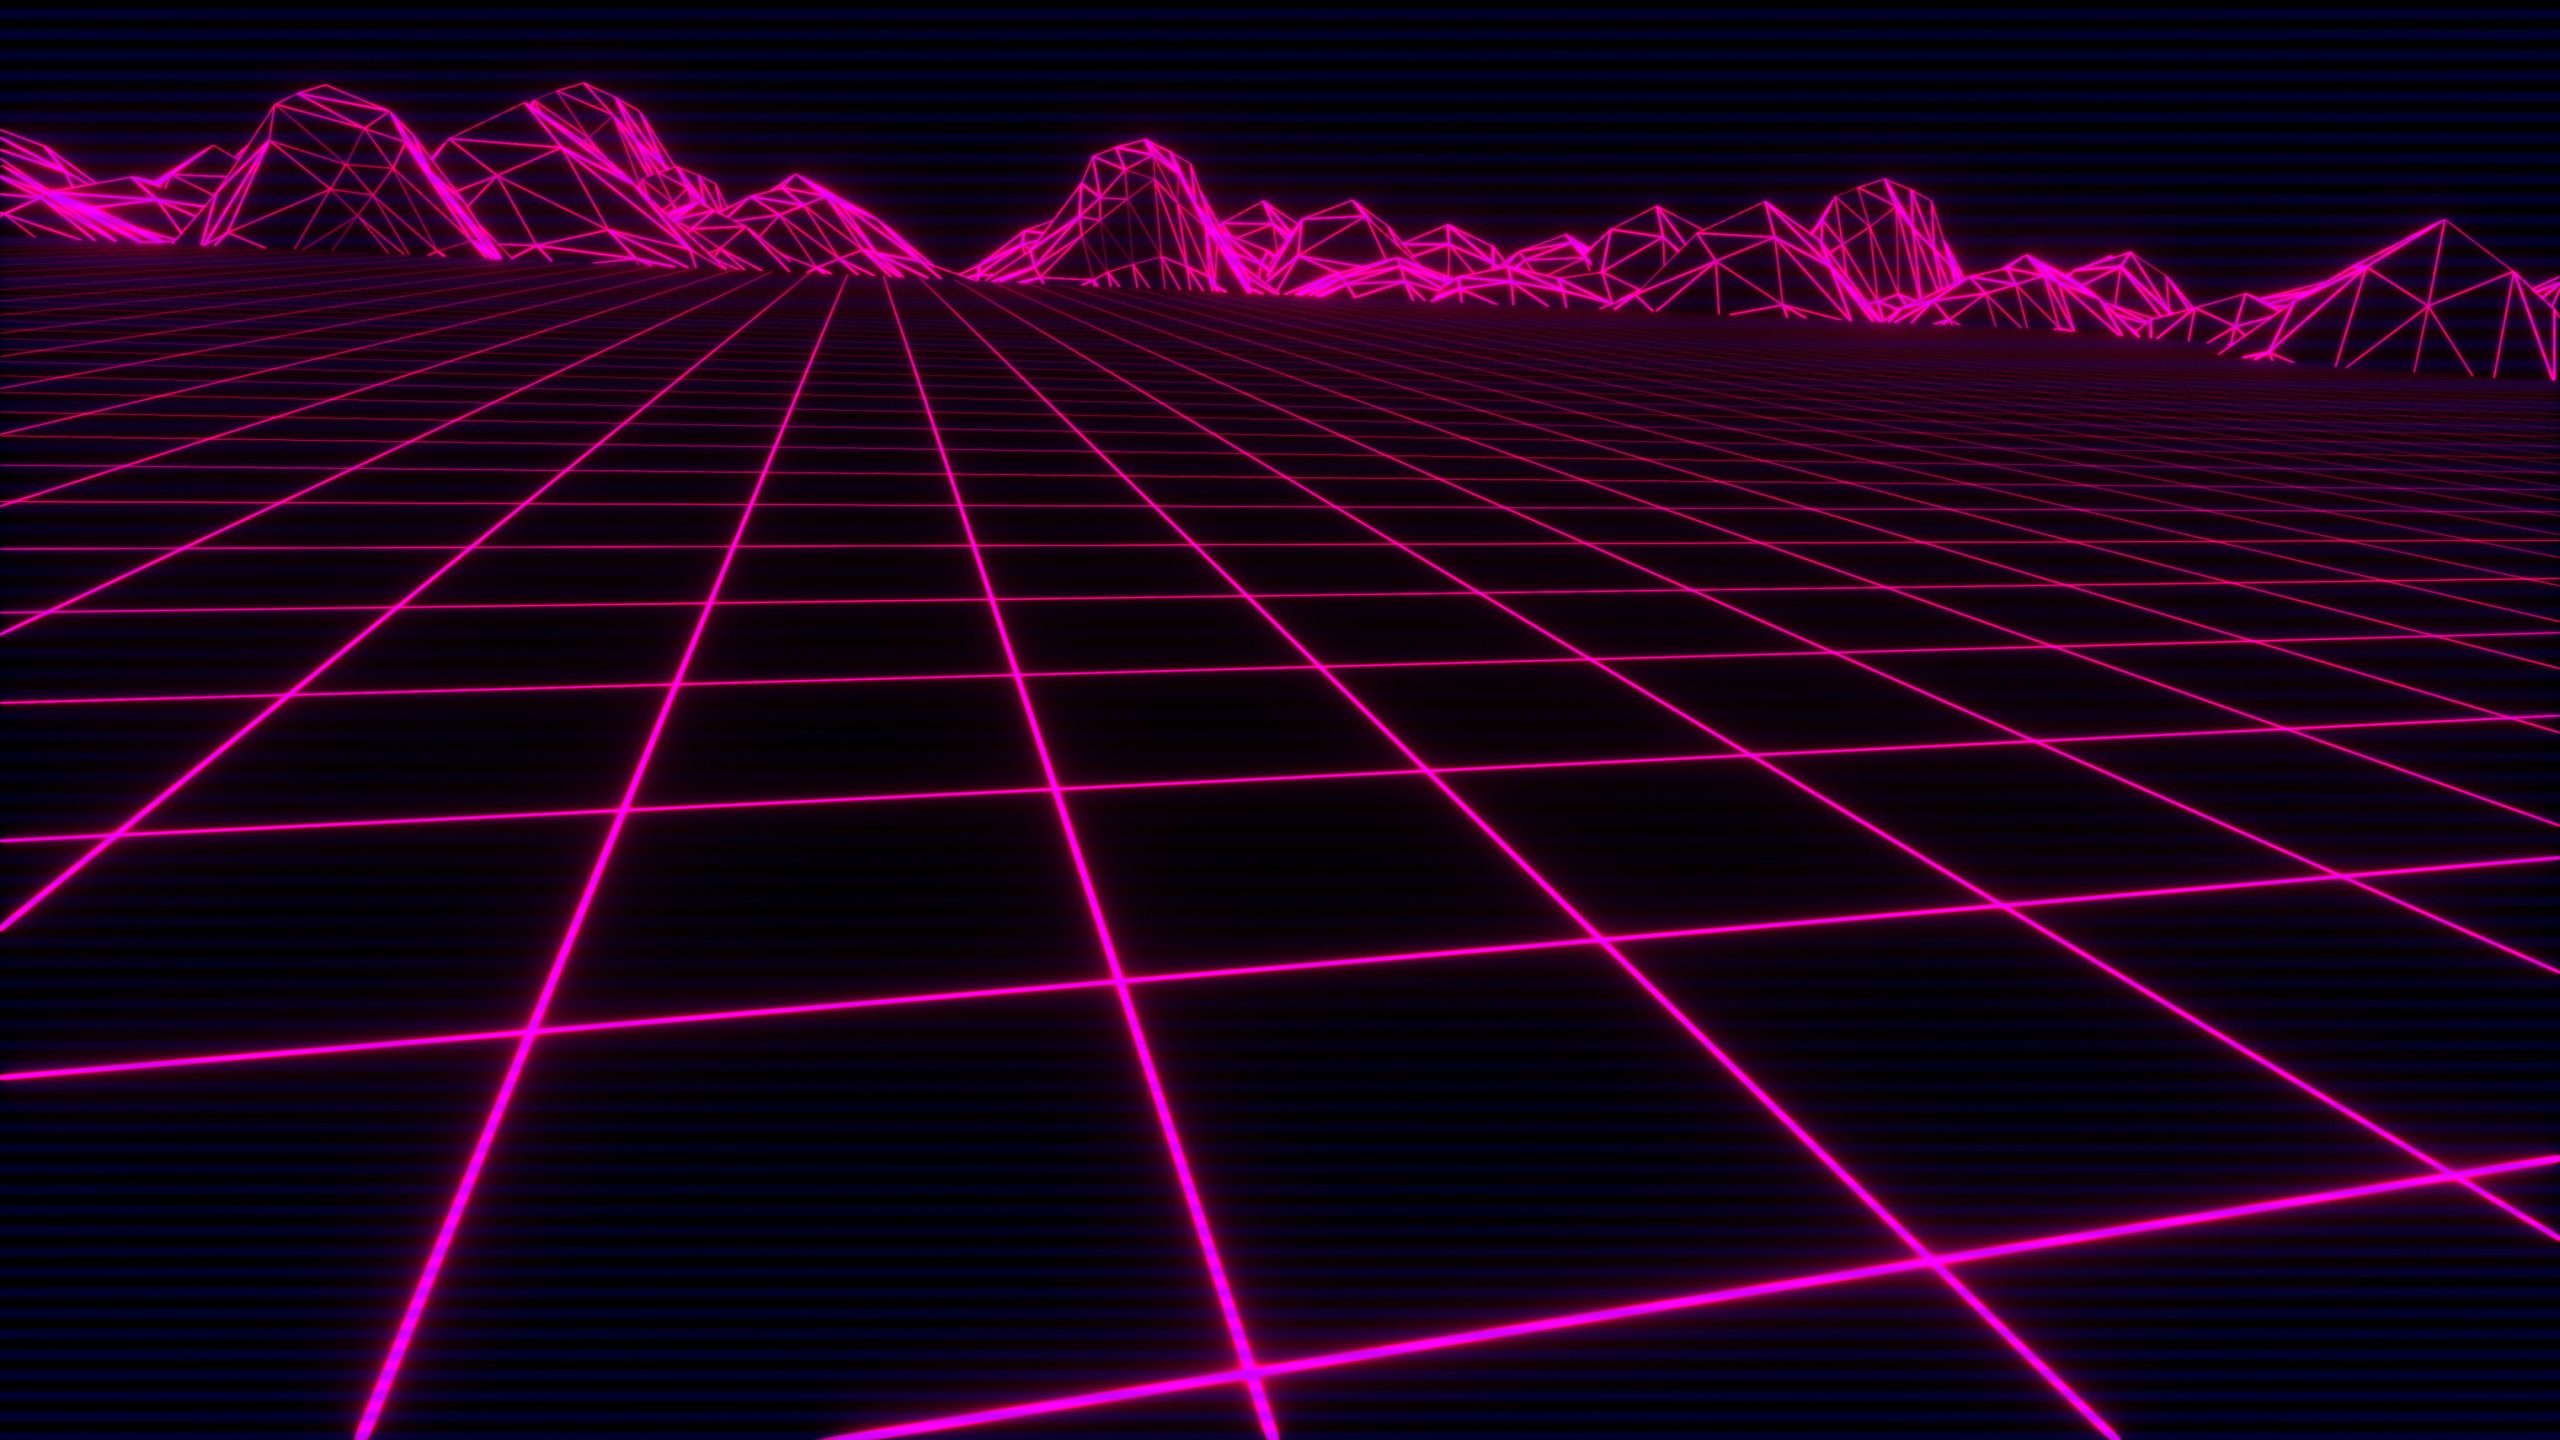 Background, Neon, VHS, Synth, Retrowave, Synthwave, New Retro Wave